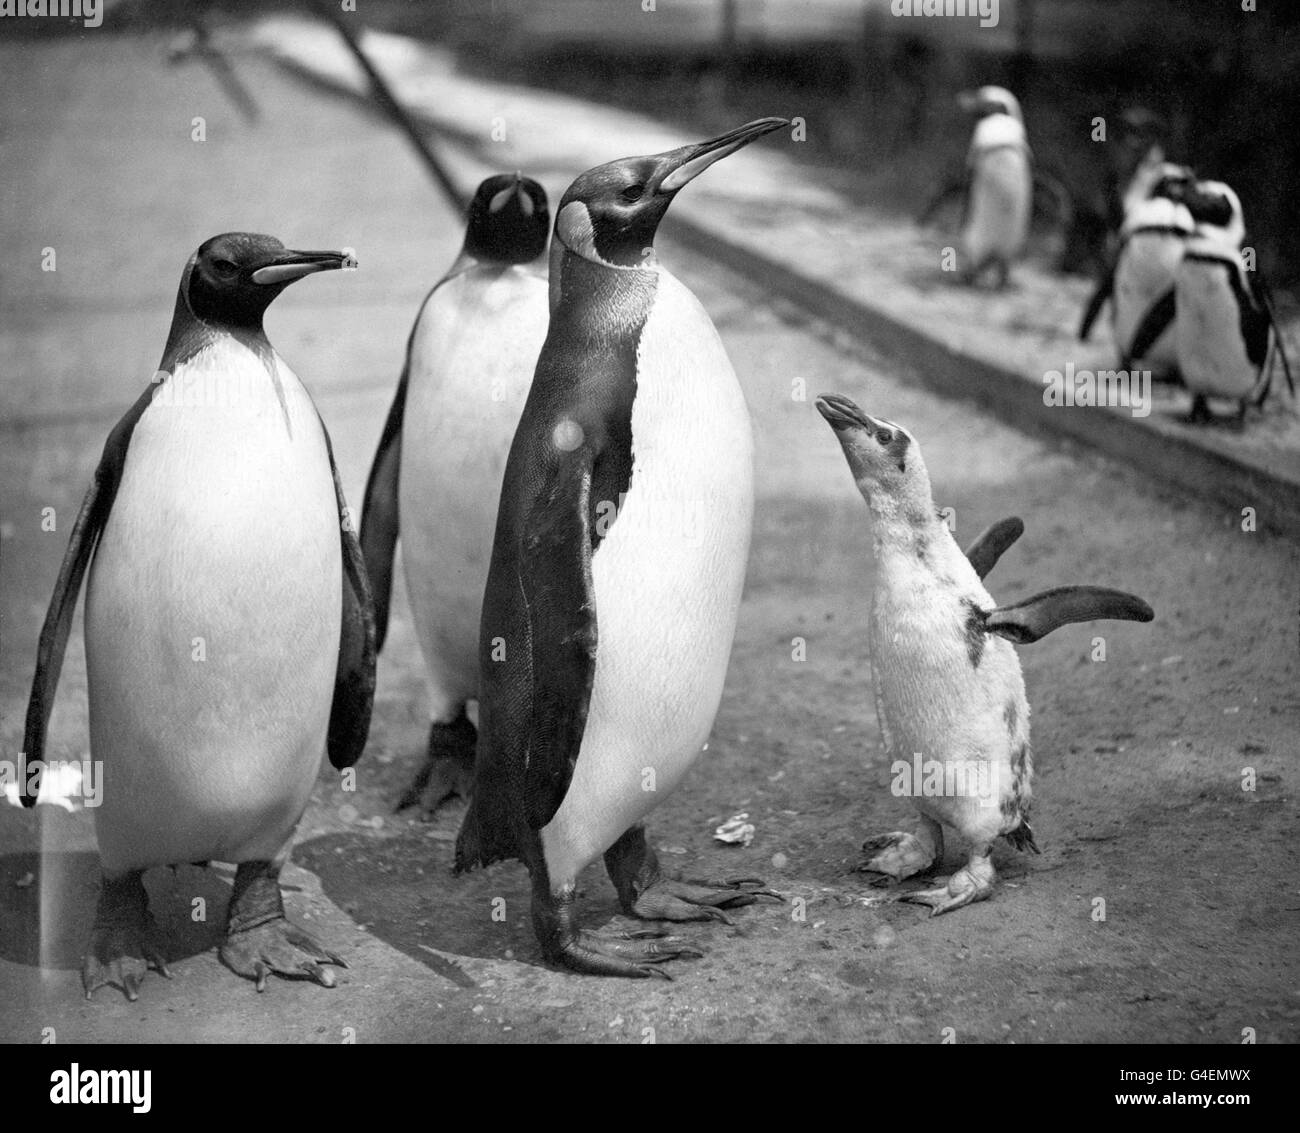 King penguins and baby in the penguin enclosure at London Zoo. In the background are Magellanic penguins, which share the enclosure. Stock Photo